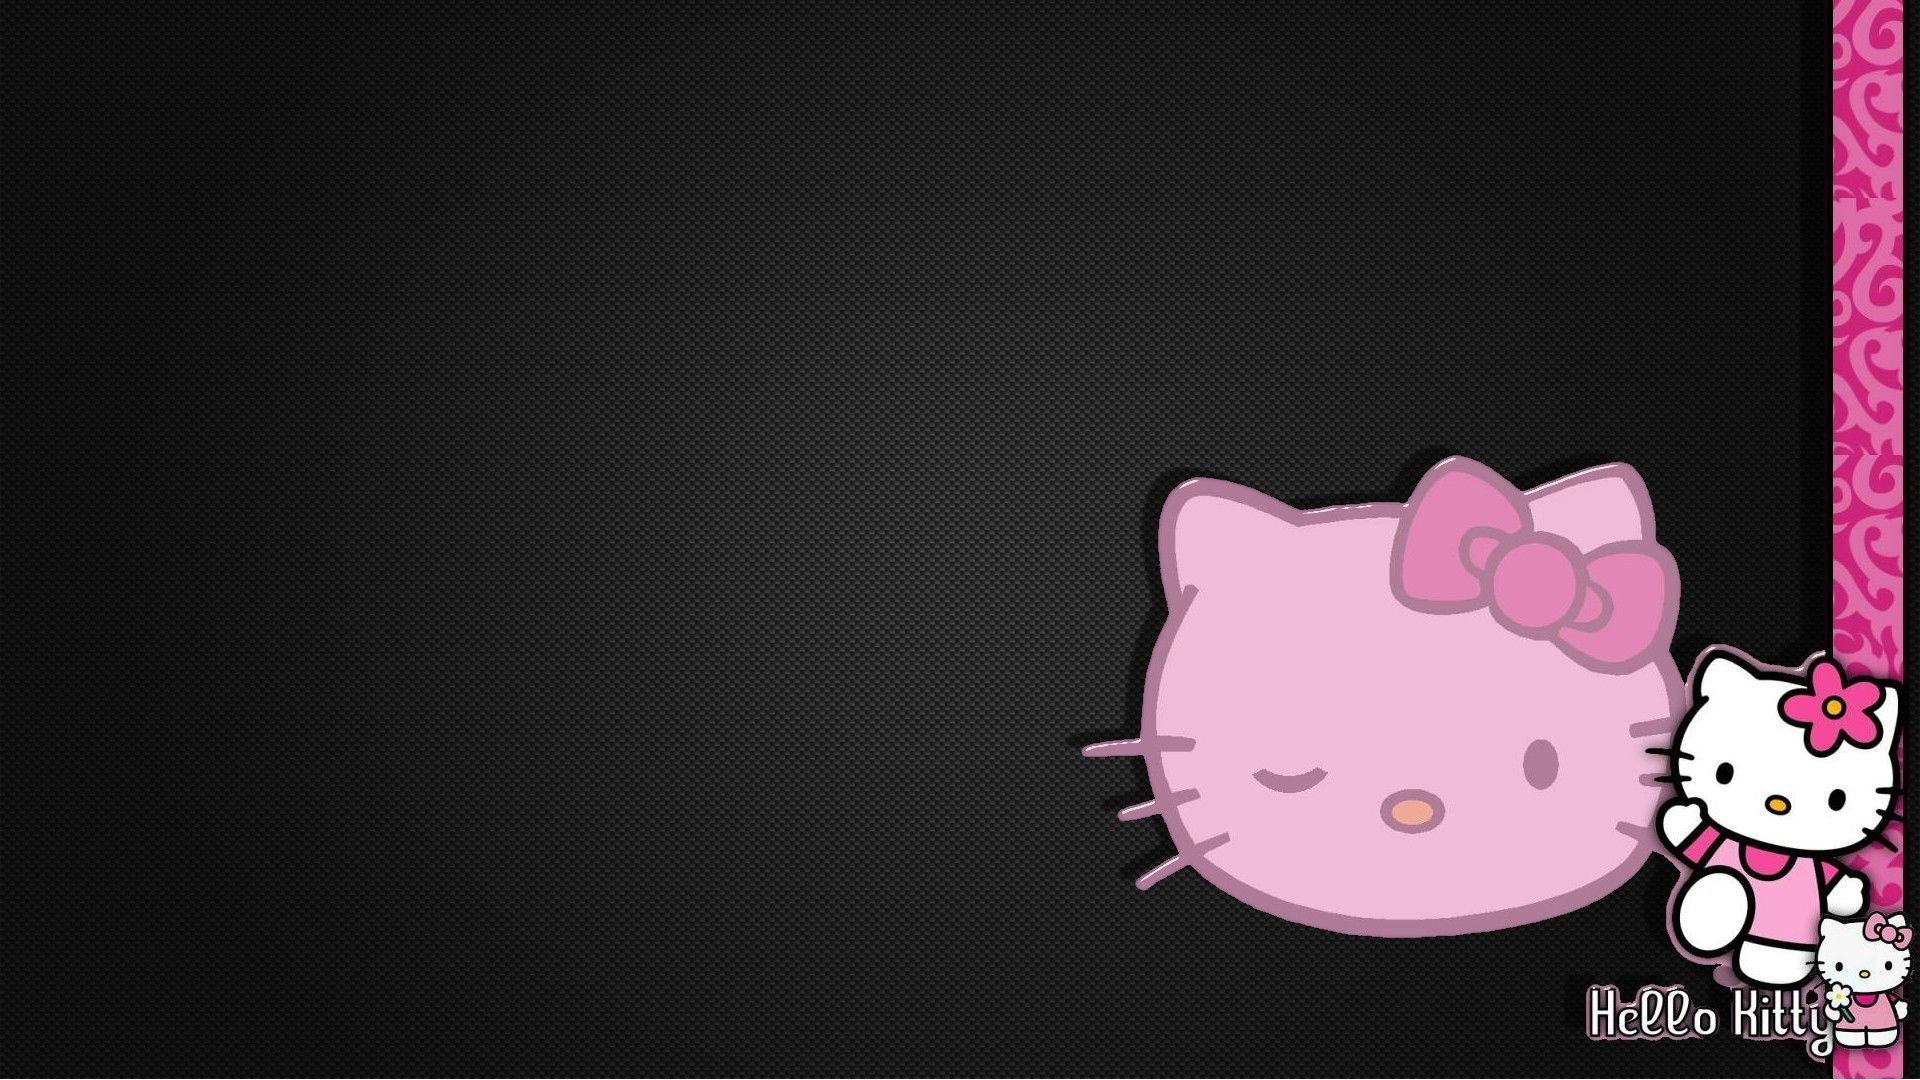 1920x1080 Hello Kitty Pink And Black Love Wallpaper Widescreen Is 4K Wallpaper